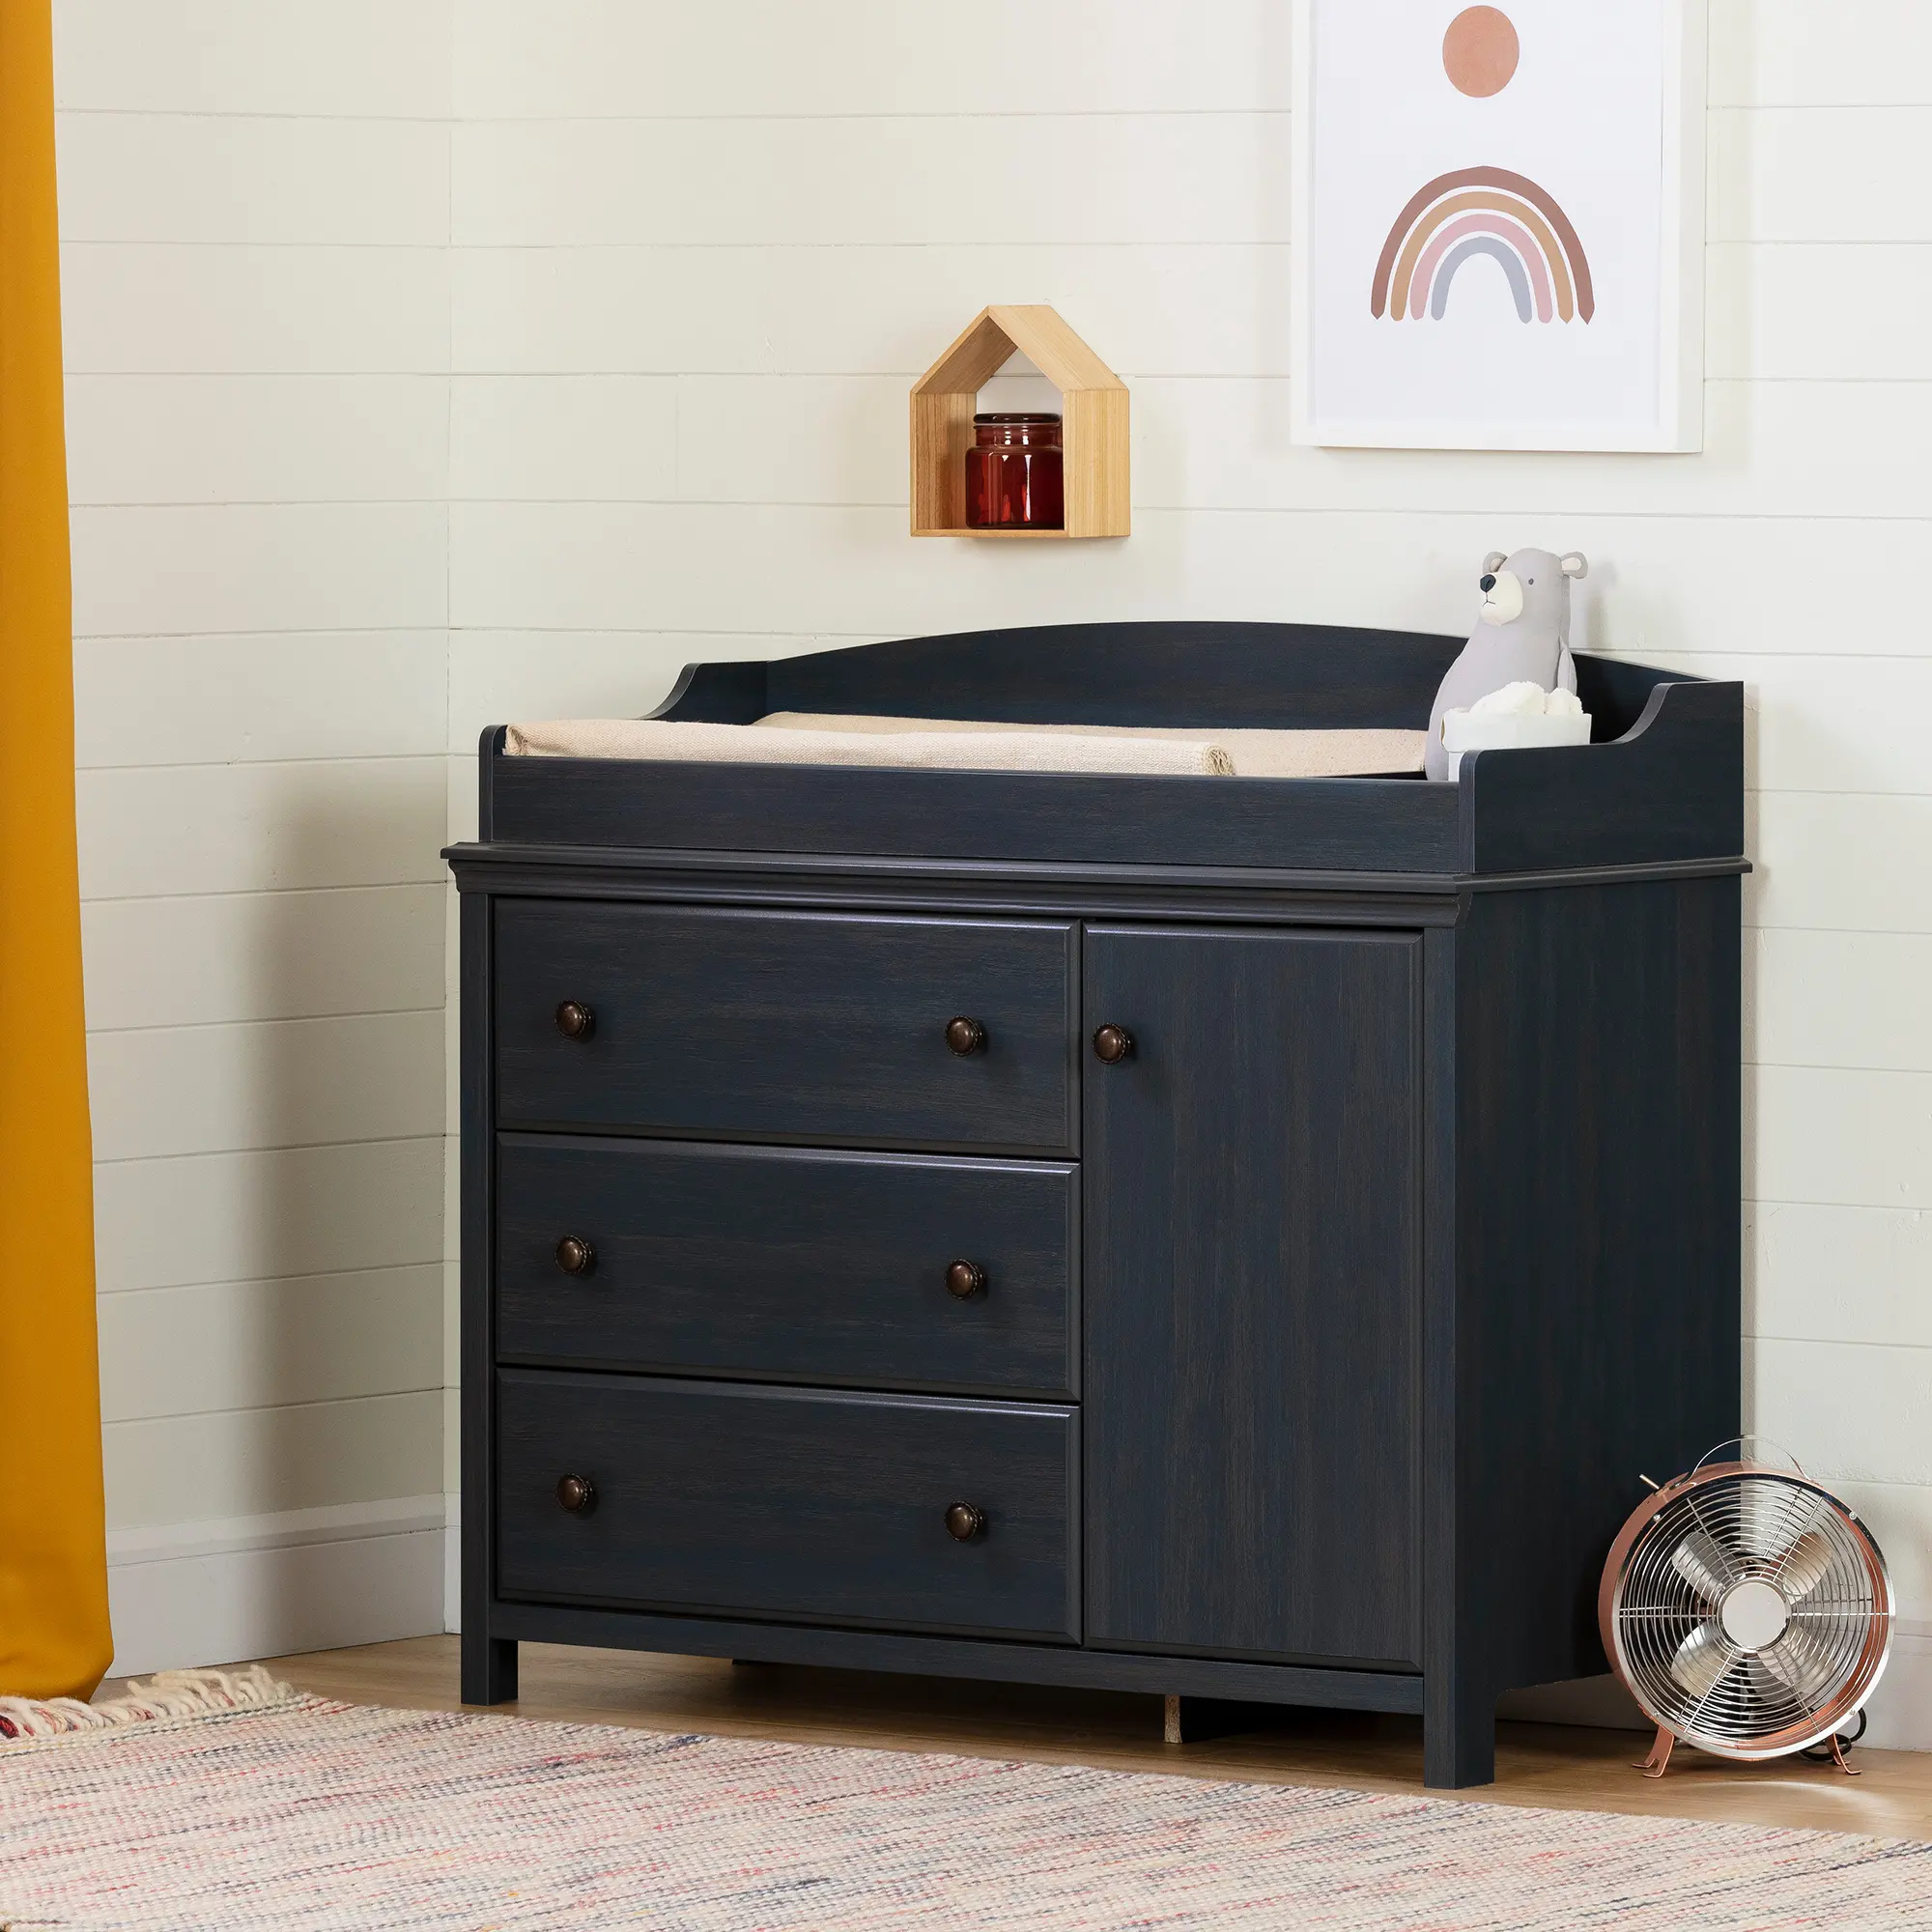 12669 Cotton Candy Blue Changing Table - South Shore sku 12669